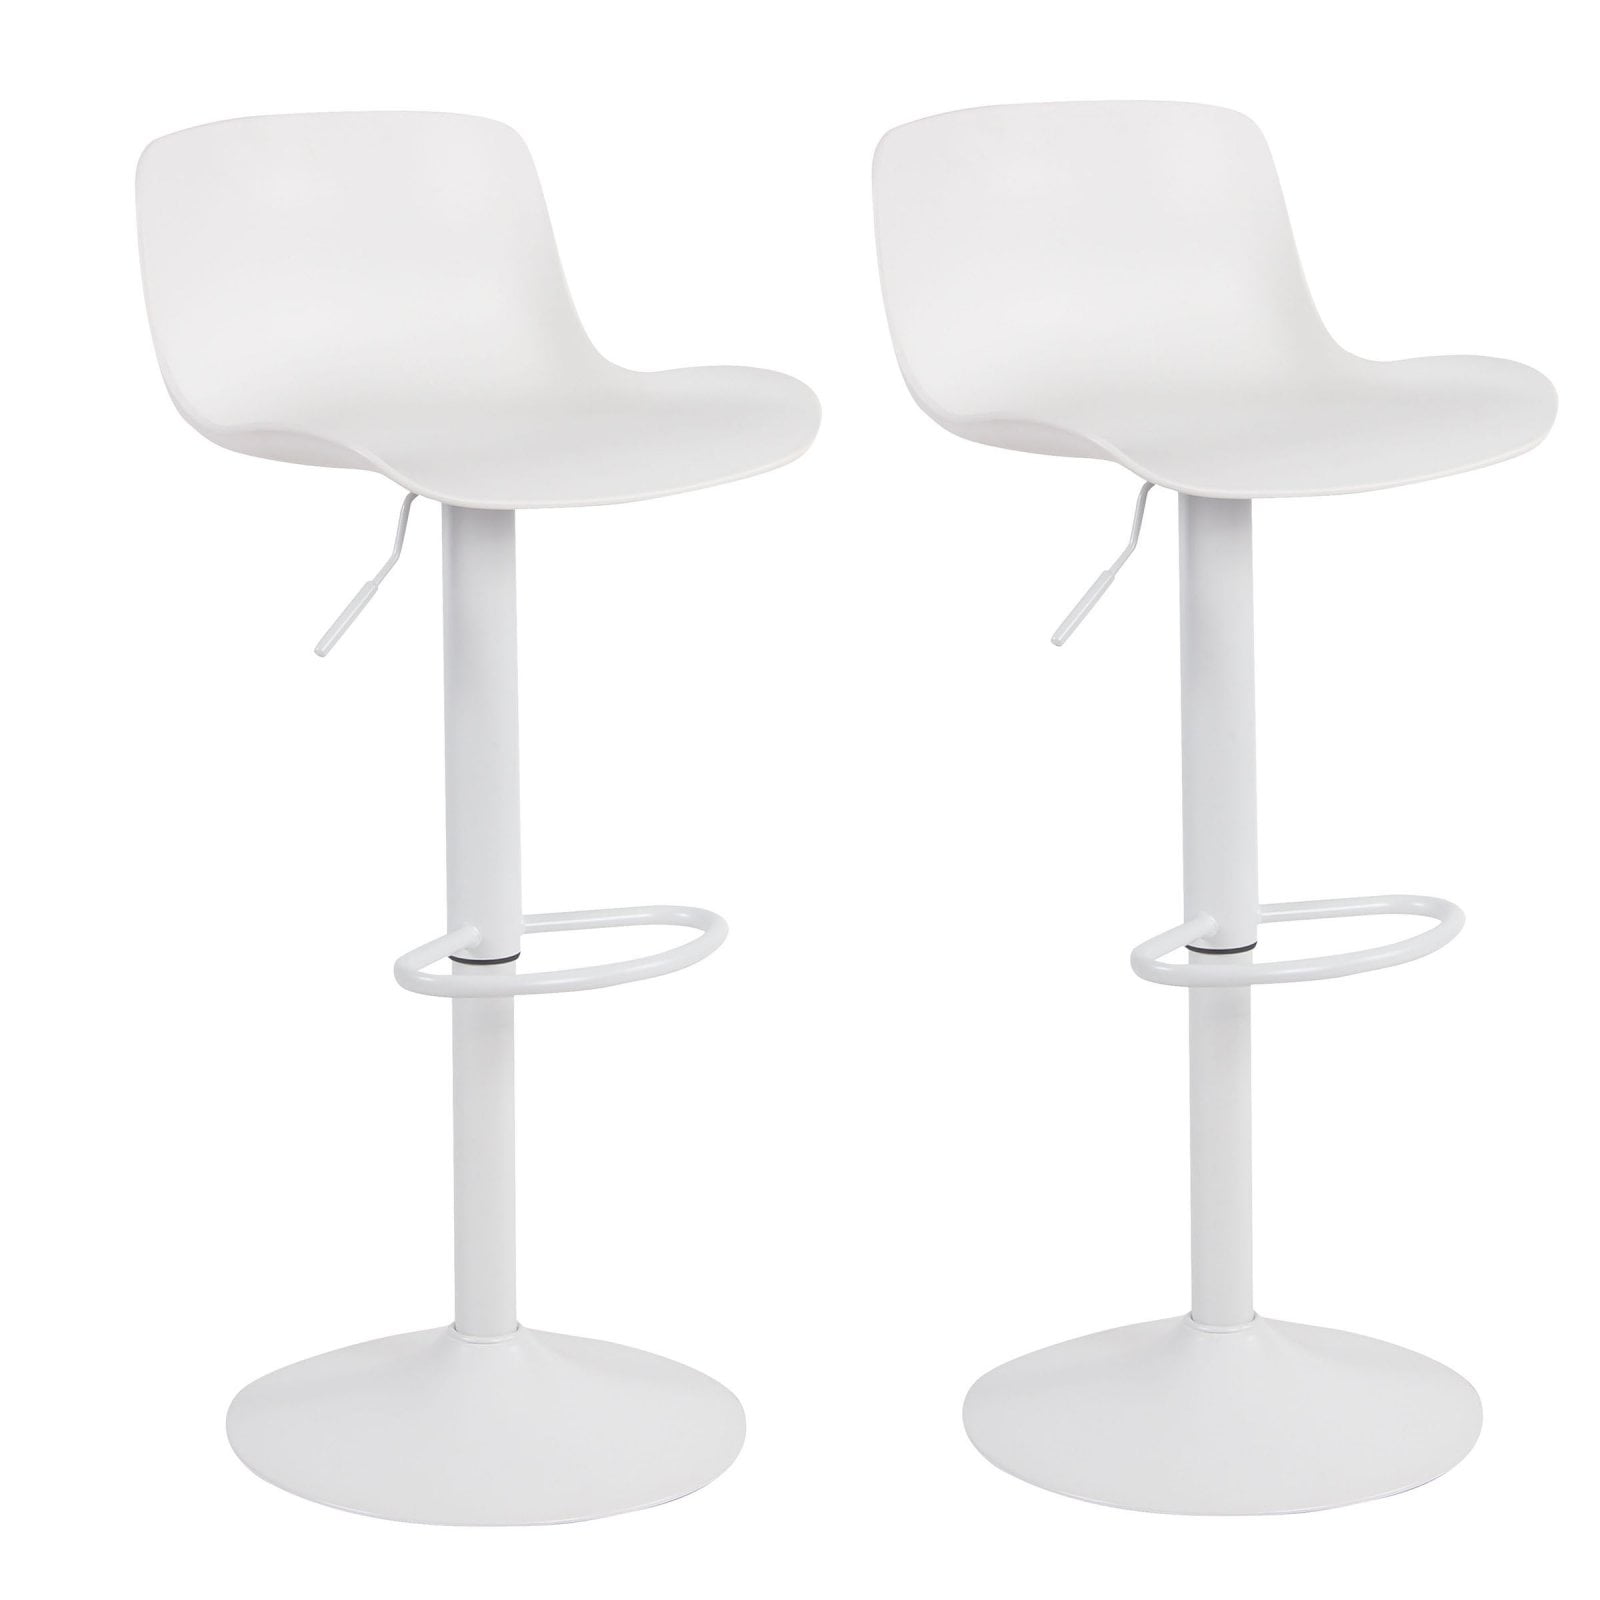 Bs199wset Adjustable Height Solid Color Monochromatic Bar Stool Set - White